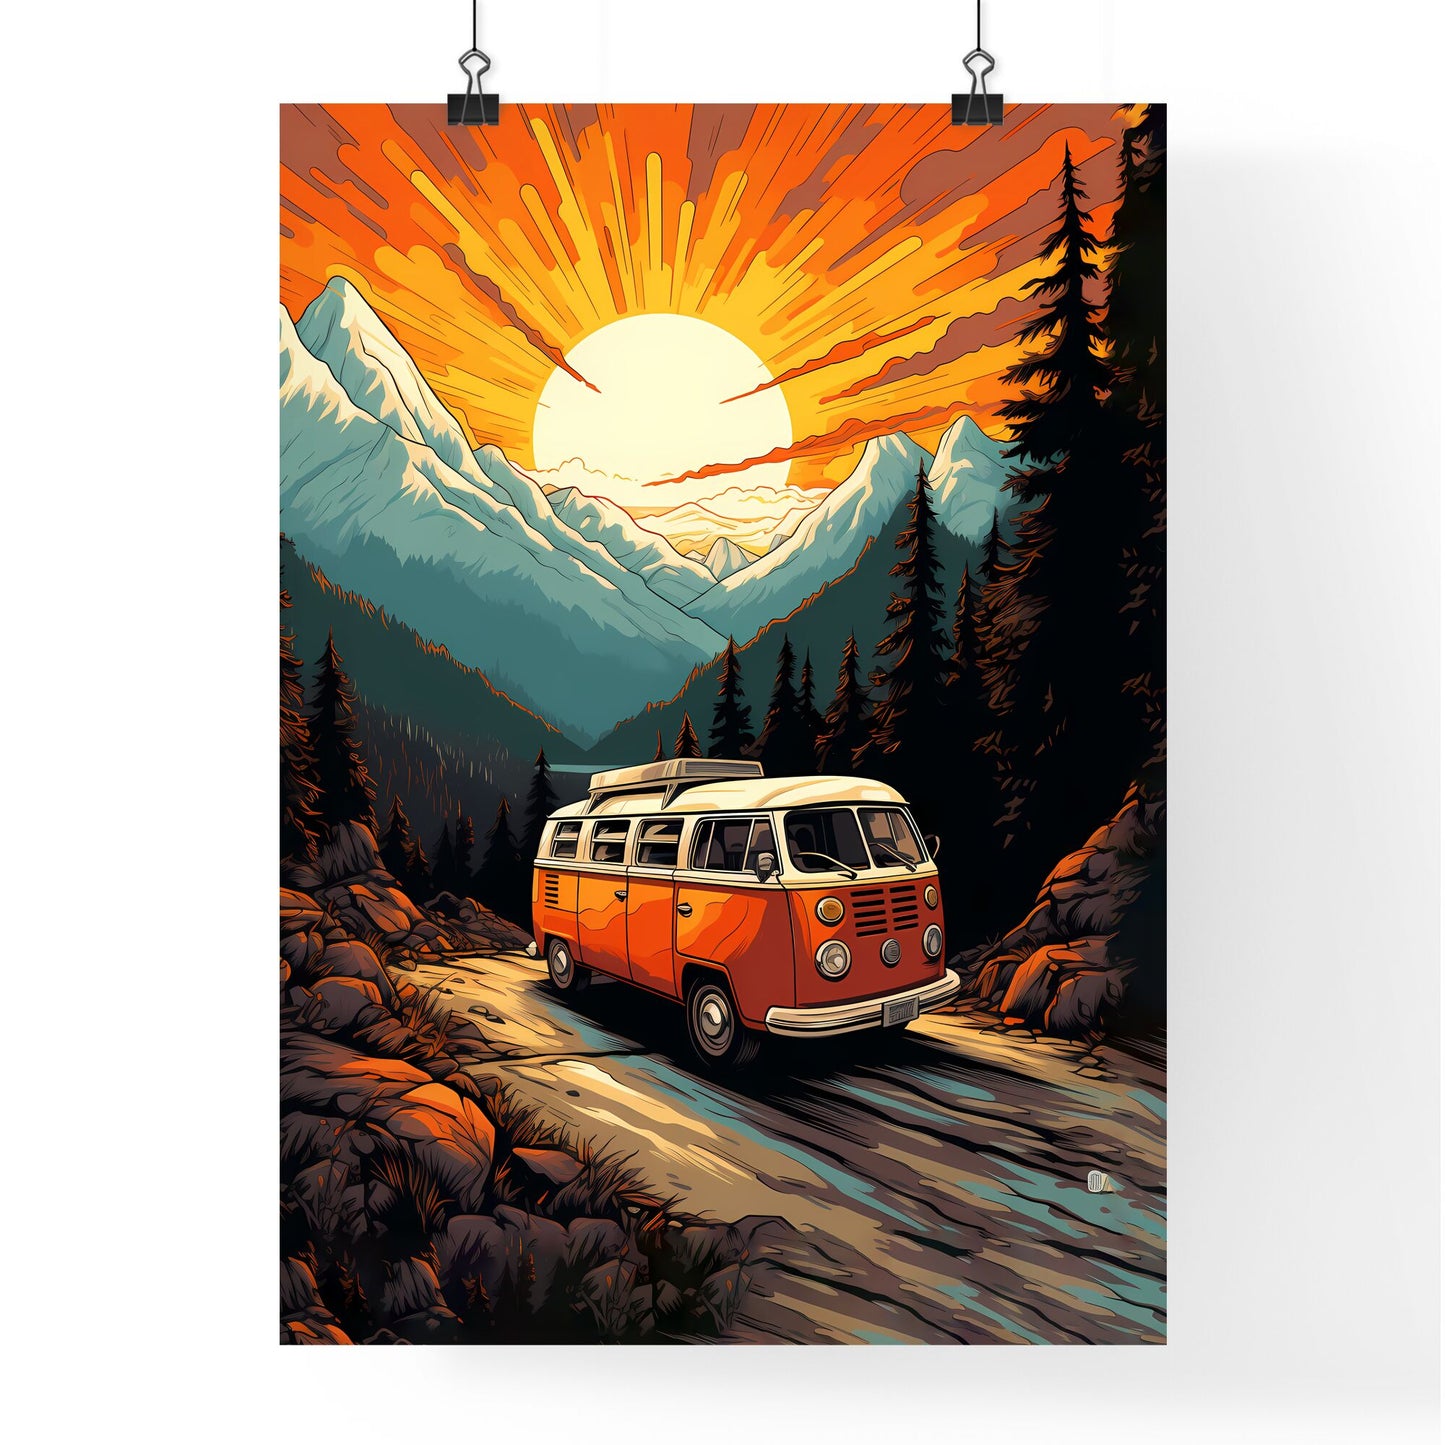 Van On A Road In A Mountain Forest Art Print Default Title